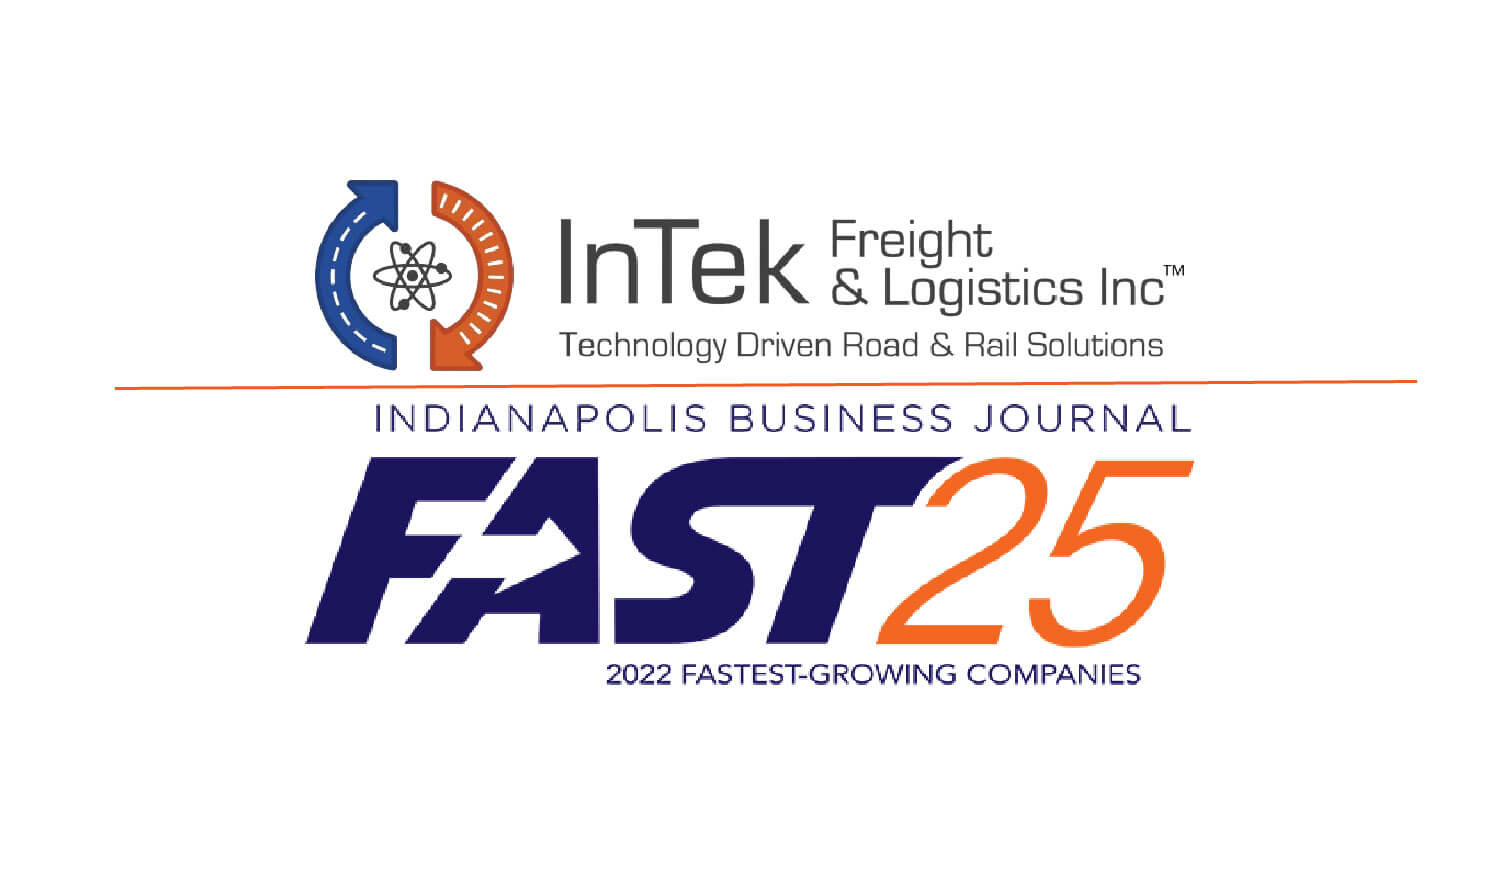 InTek Named to IBJ Fast 25 for Second Straight Year